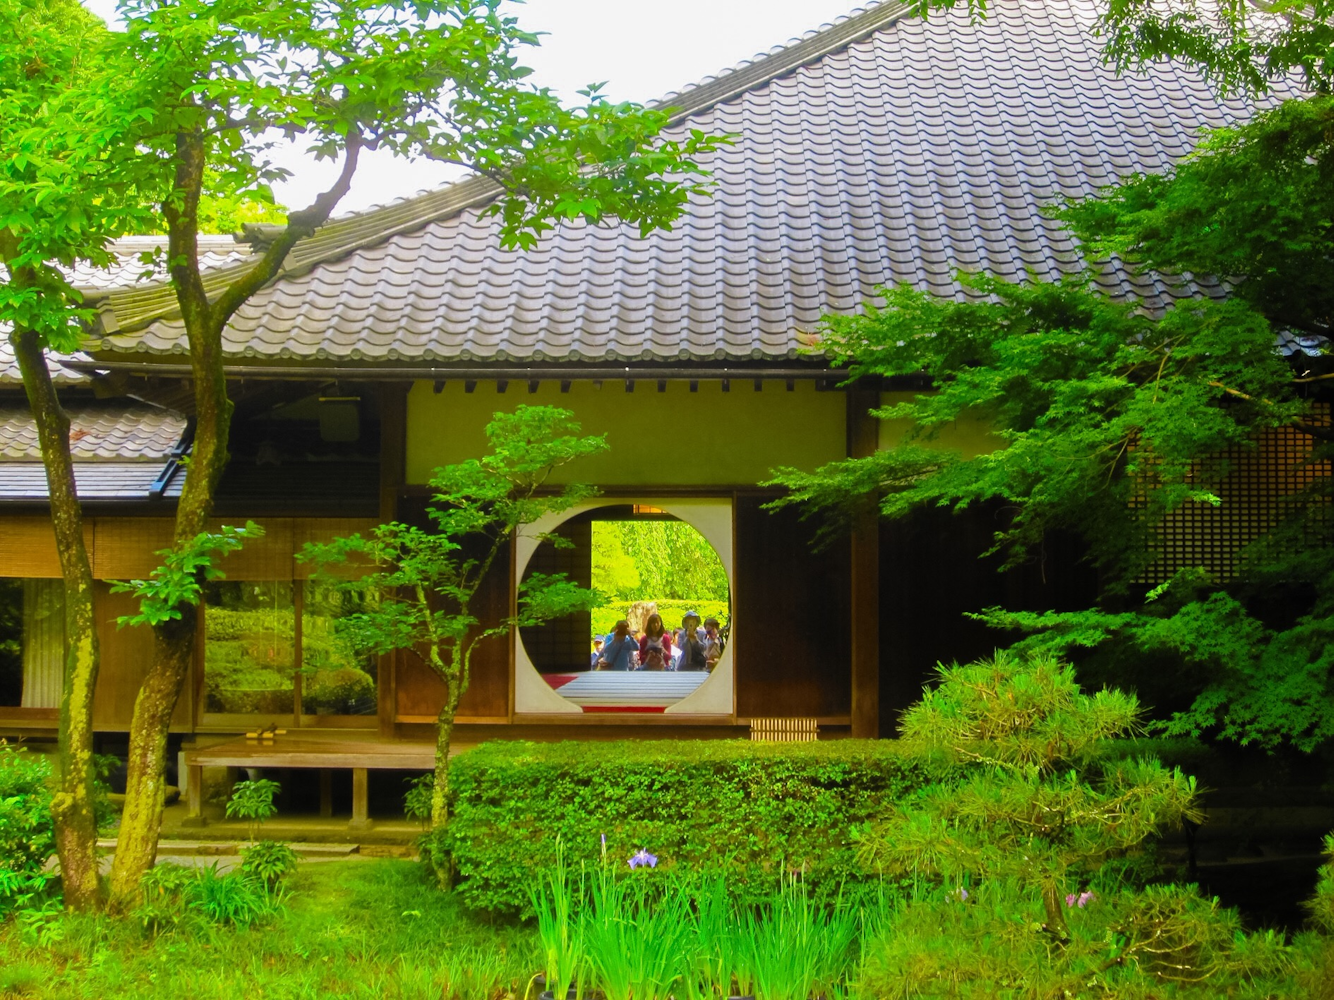 Meigetsu-in Temple in Kamakura, Japan, surrounded by greenery, features a building with a large round passage.